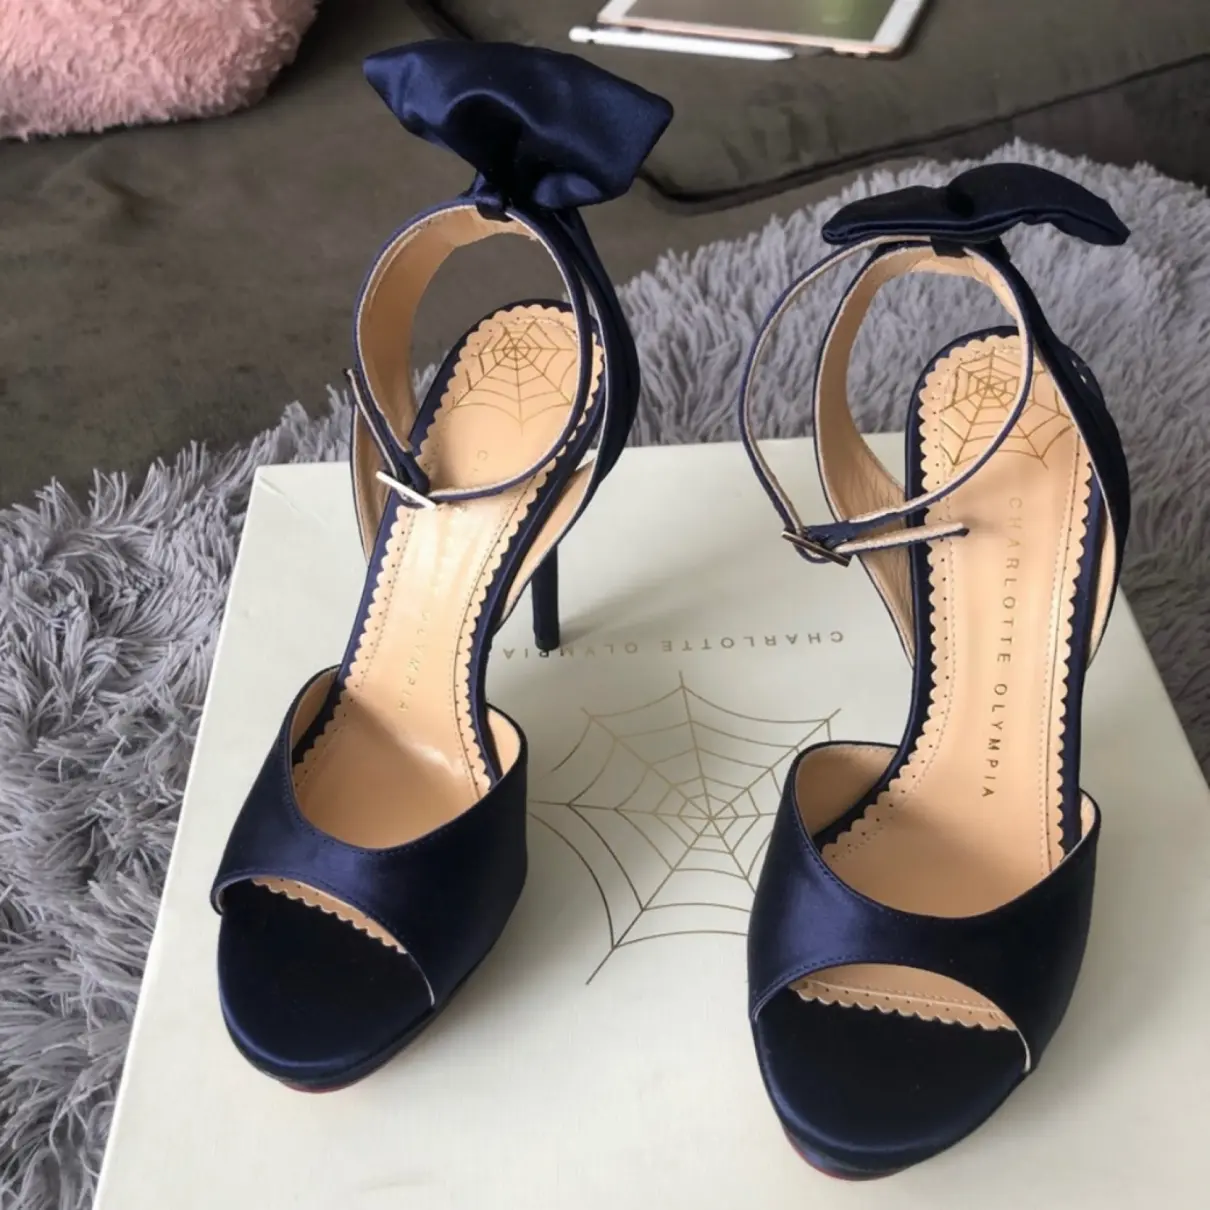 Buy Charlotte Olympia Cloth sandals online